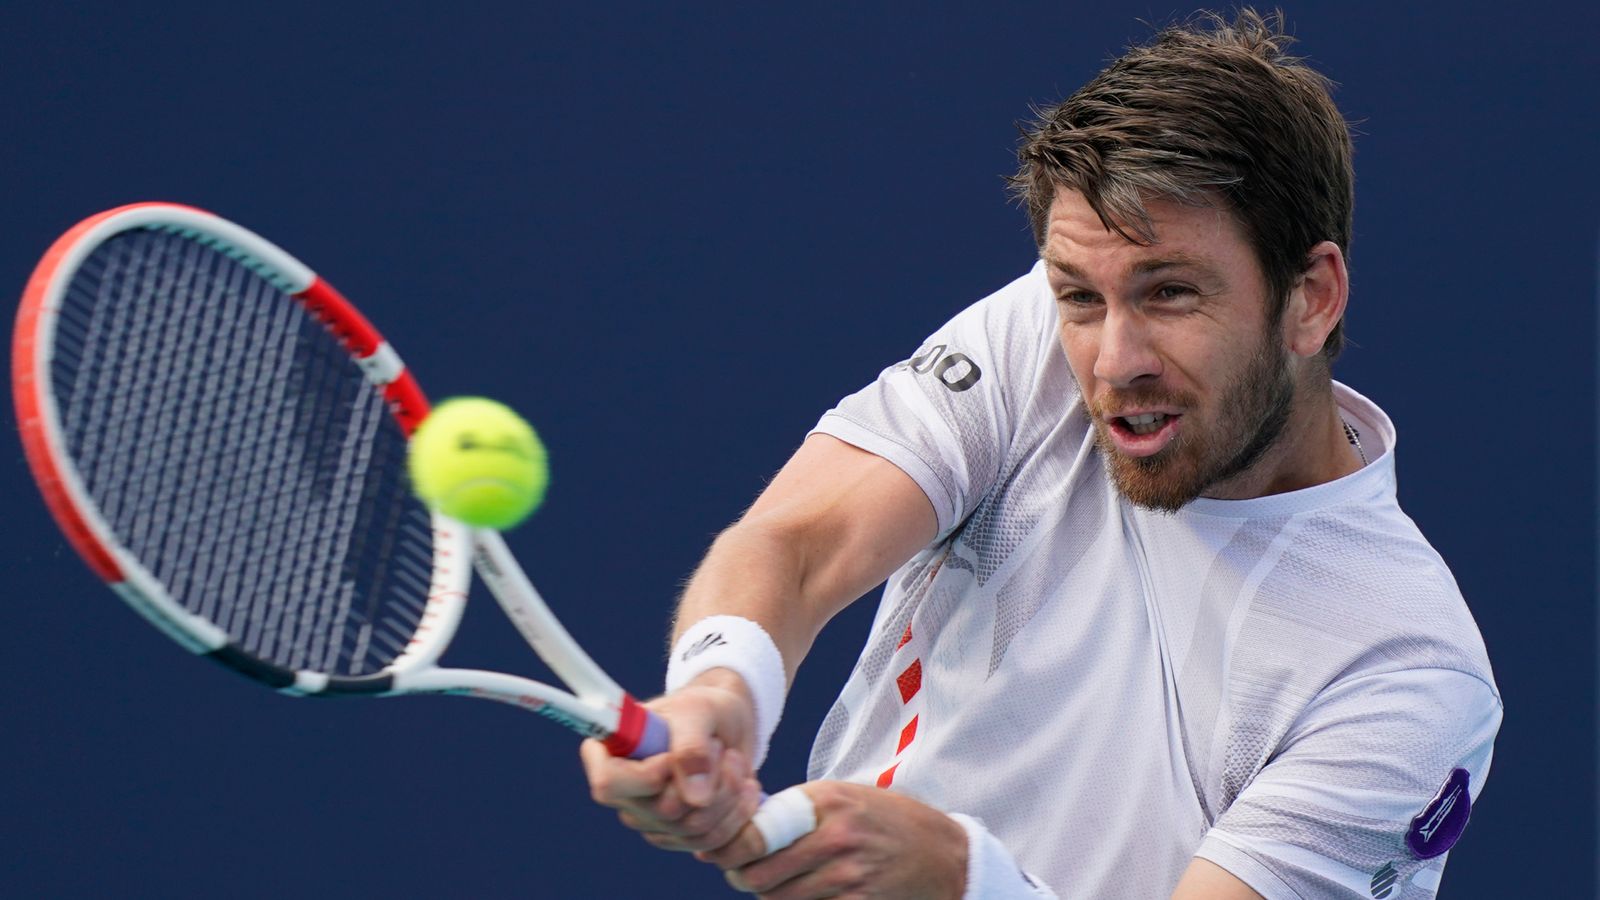 Cameron Norrie becomes British tennis number one after reaching